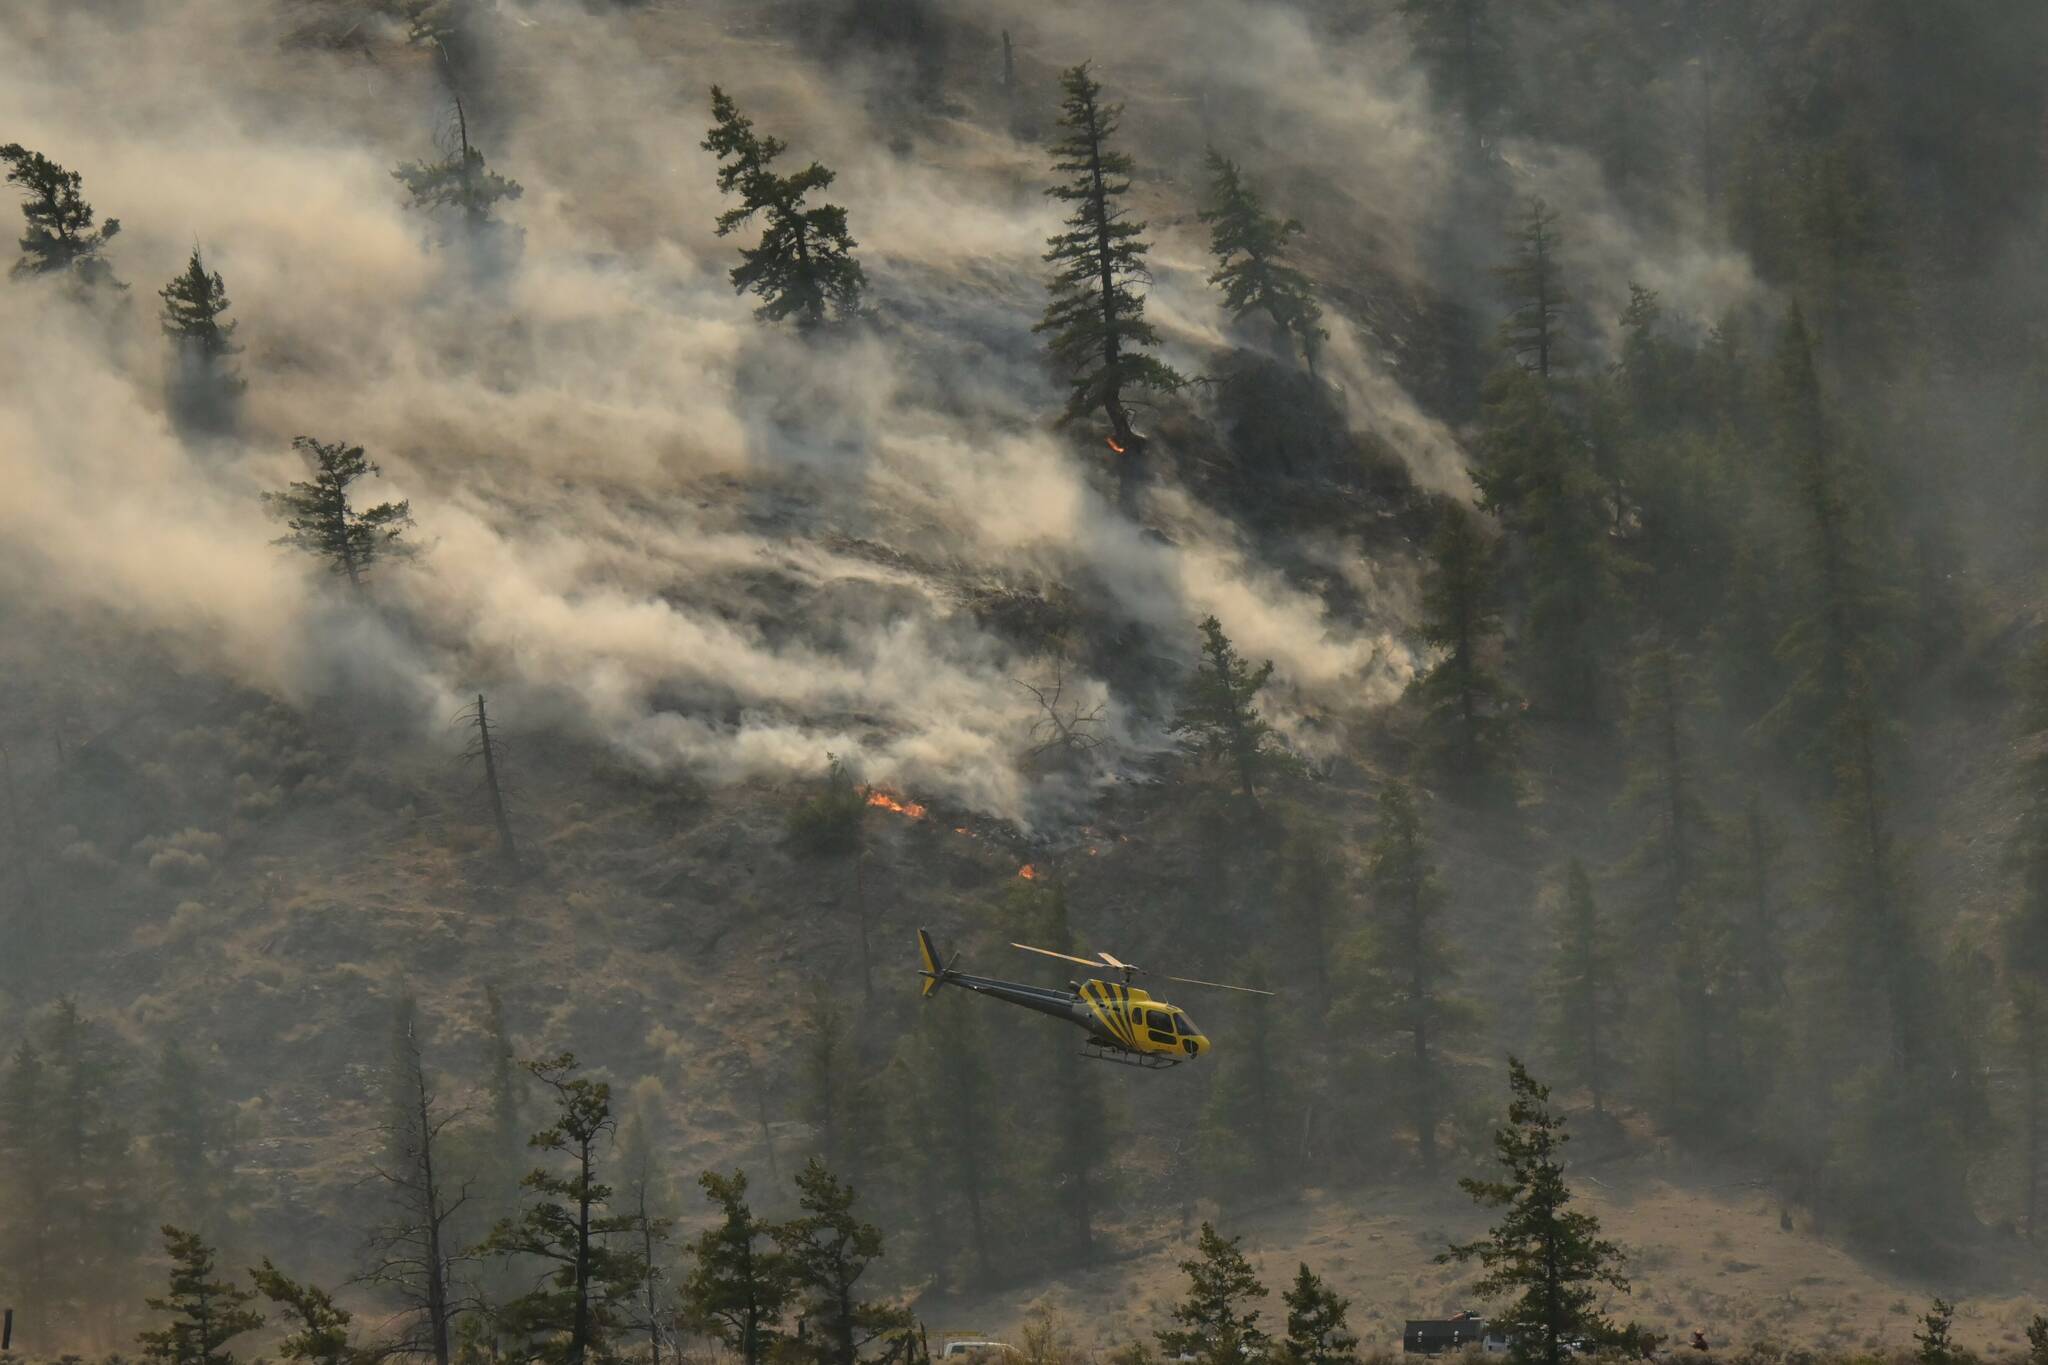 The Crater Creek wildfire south of Keremeos is an estimated 44,000 hectares in size. (Brennan Phillips/Western News)